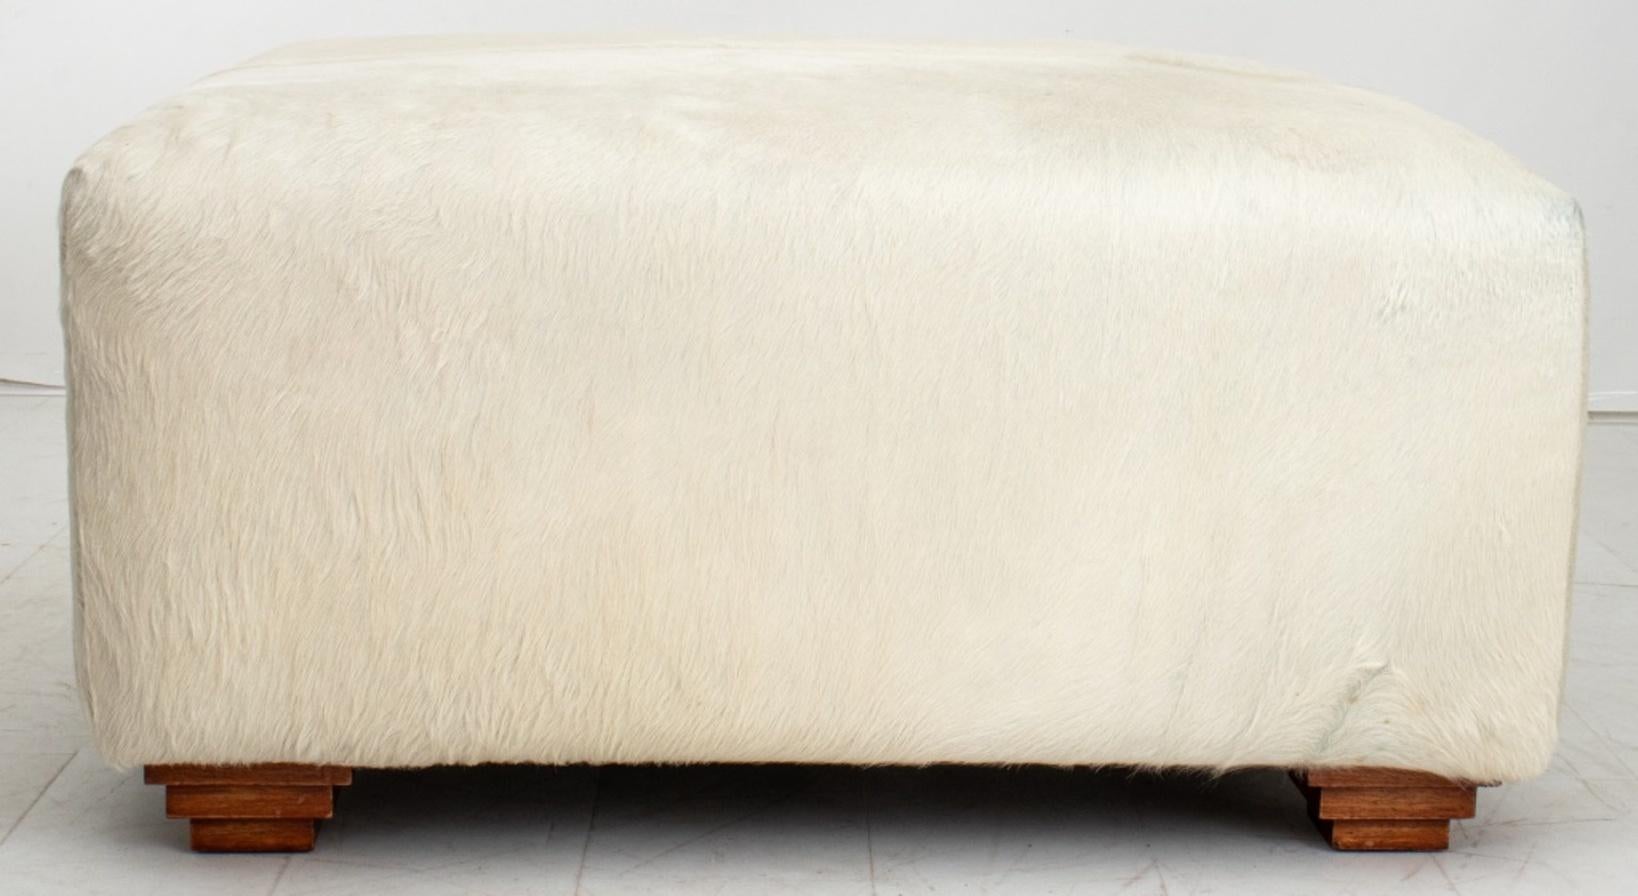 Cowhide Upholstered Storage Pouf or Ottoman In Good Condition For Sale In New York, NY